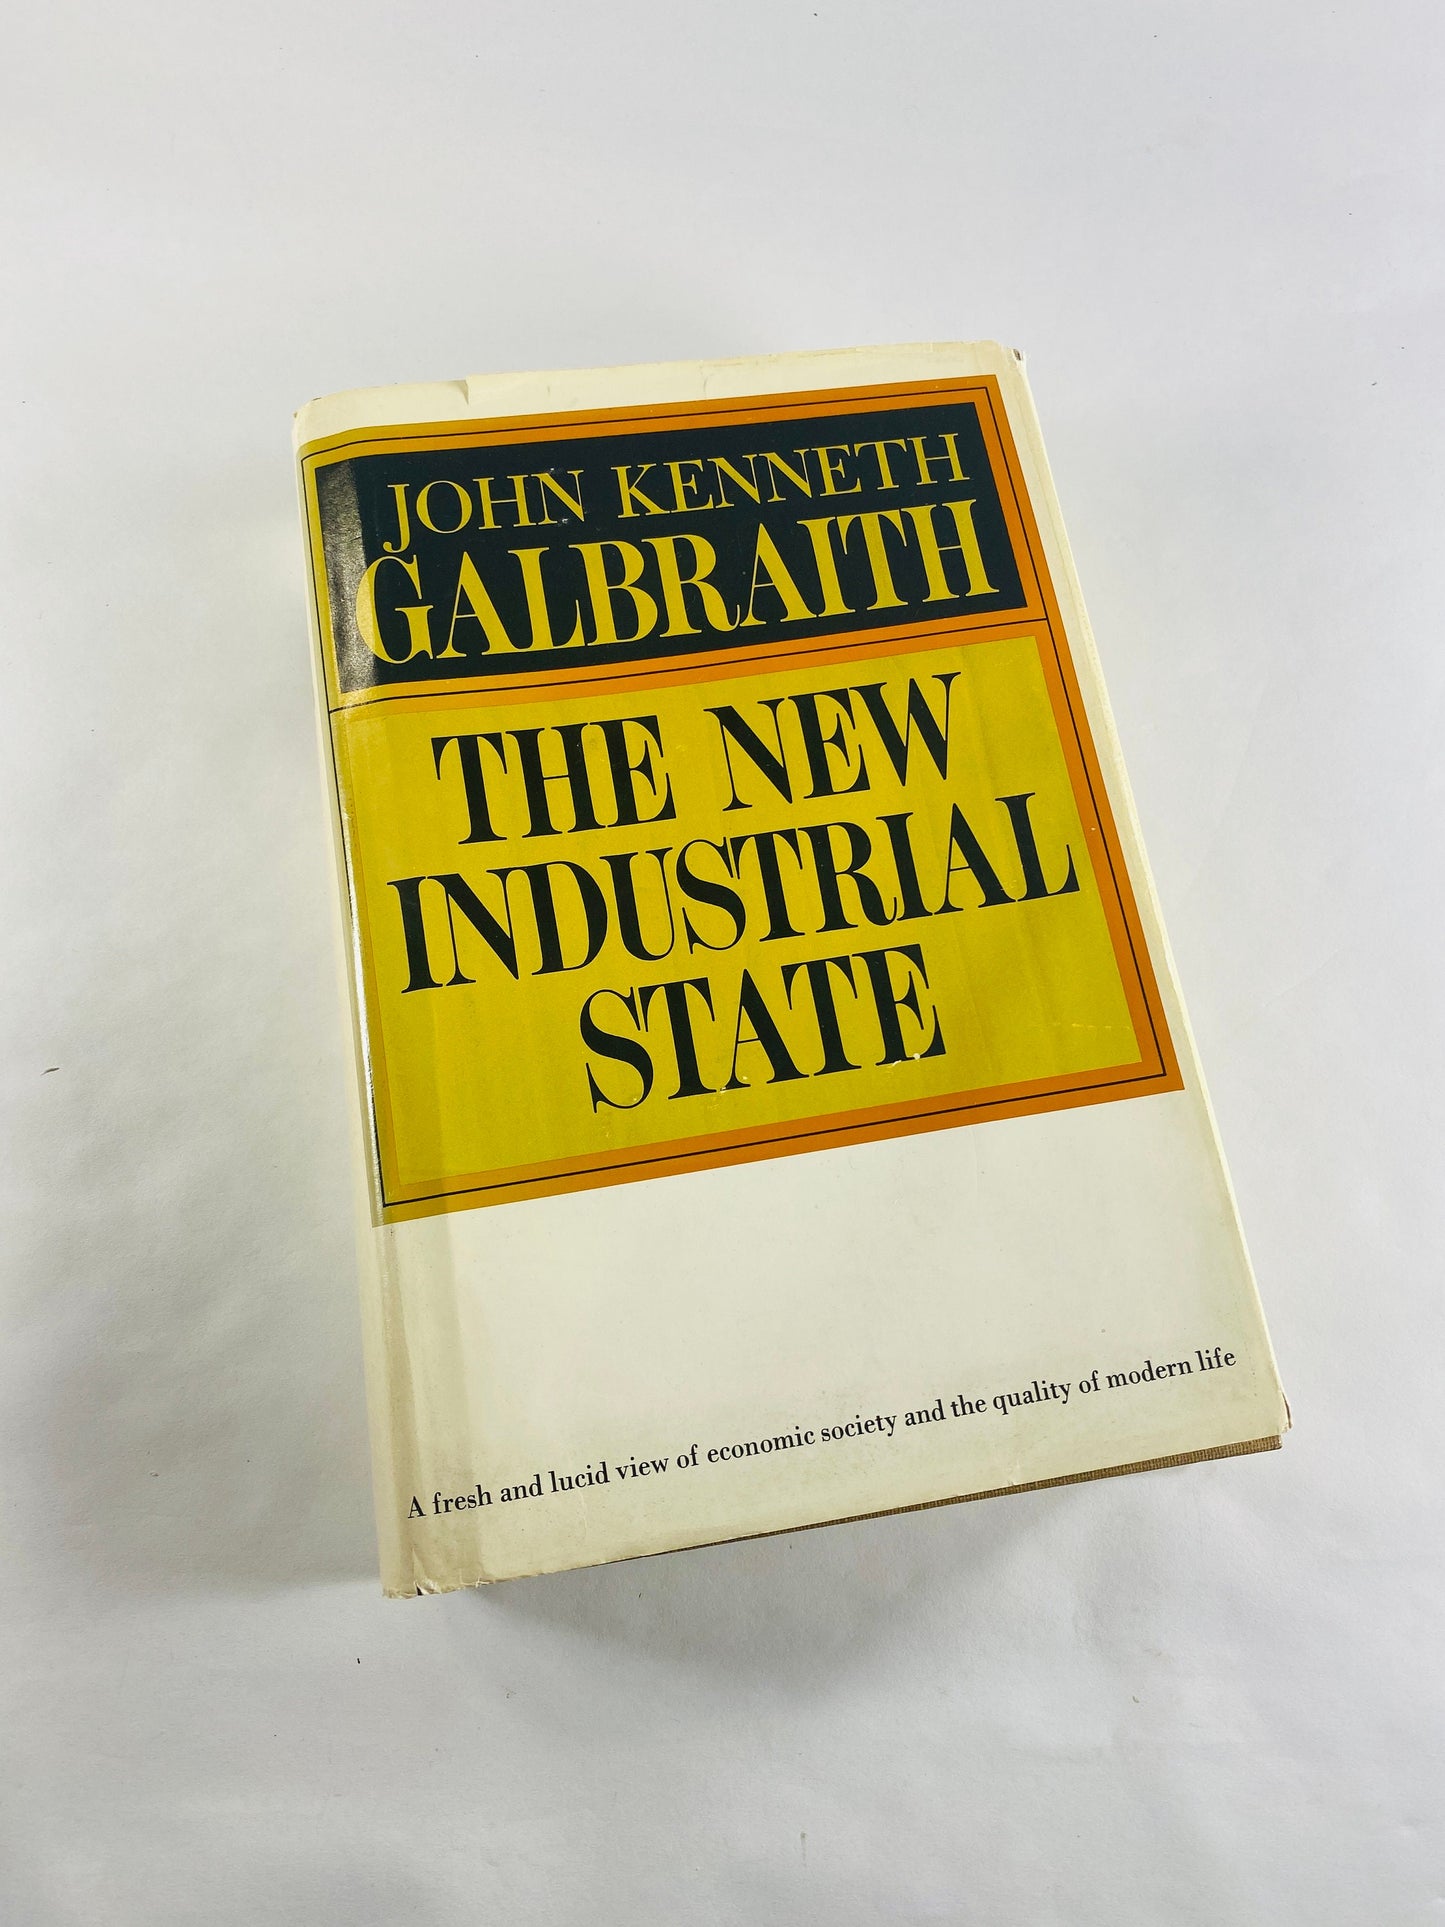 John Kenneth Galbraith FIRST EDITION New Industrial State vintage book circa 1967 about class struggle economics and large company control